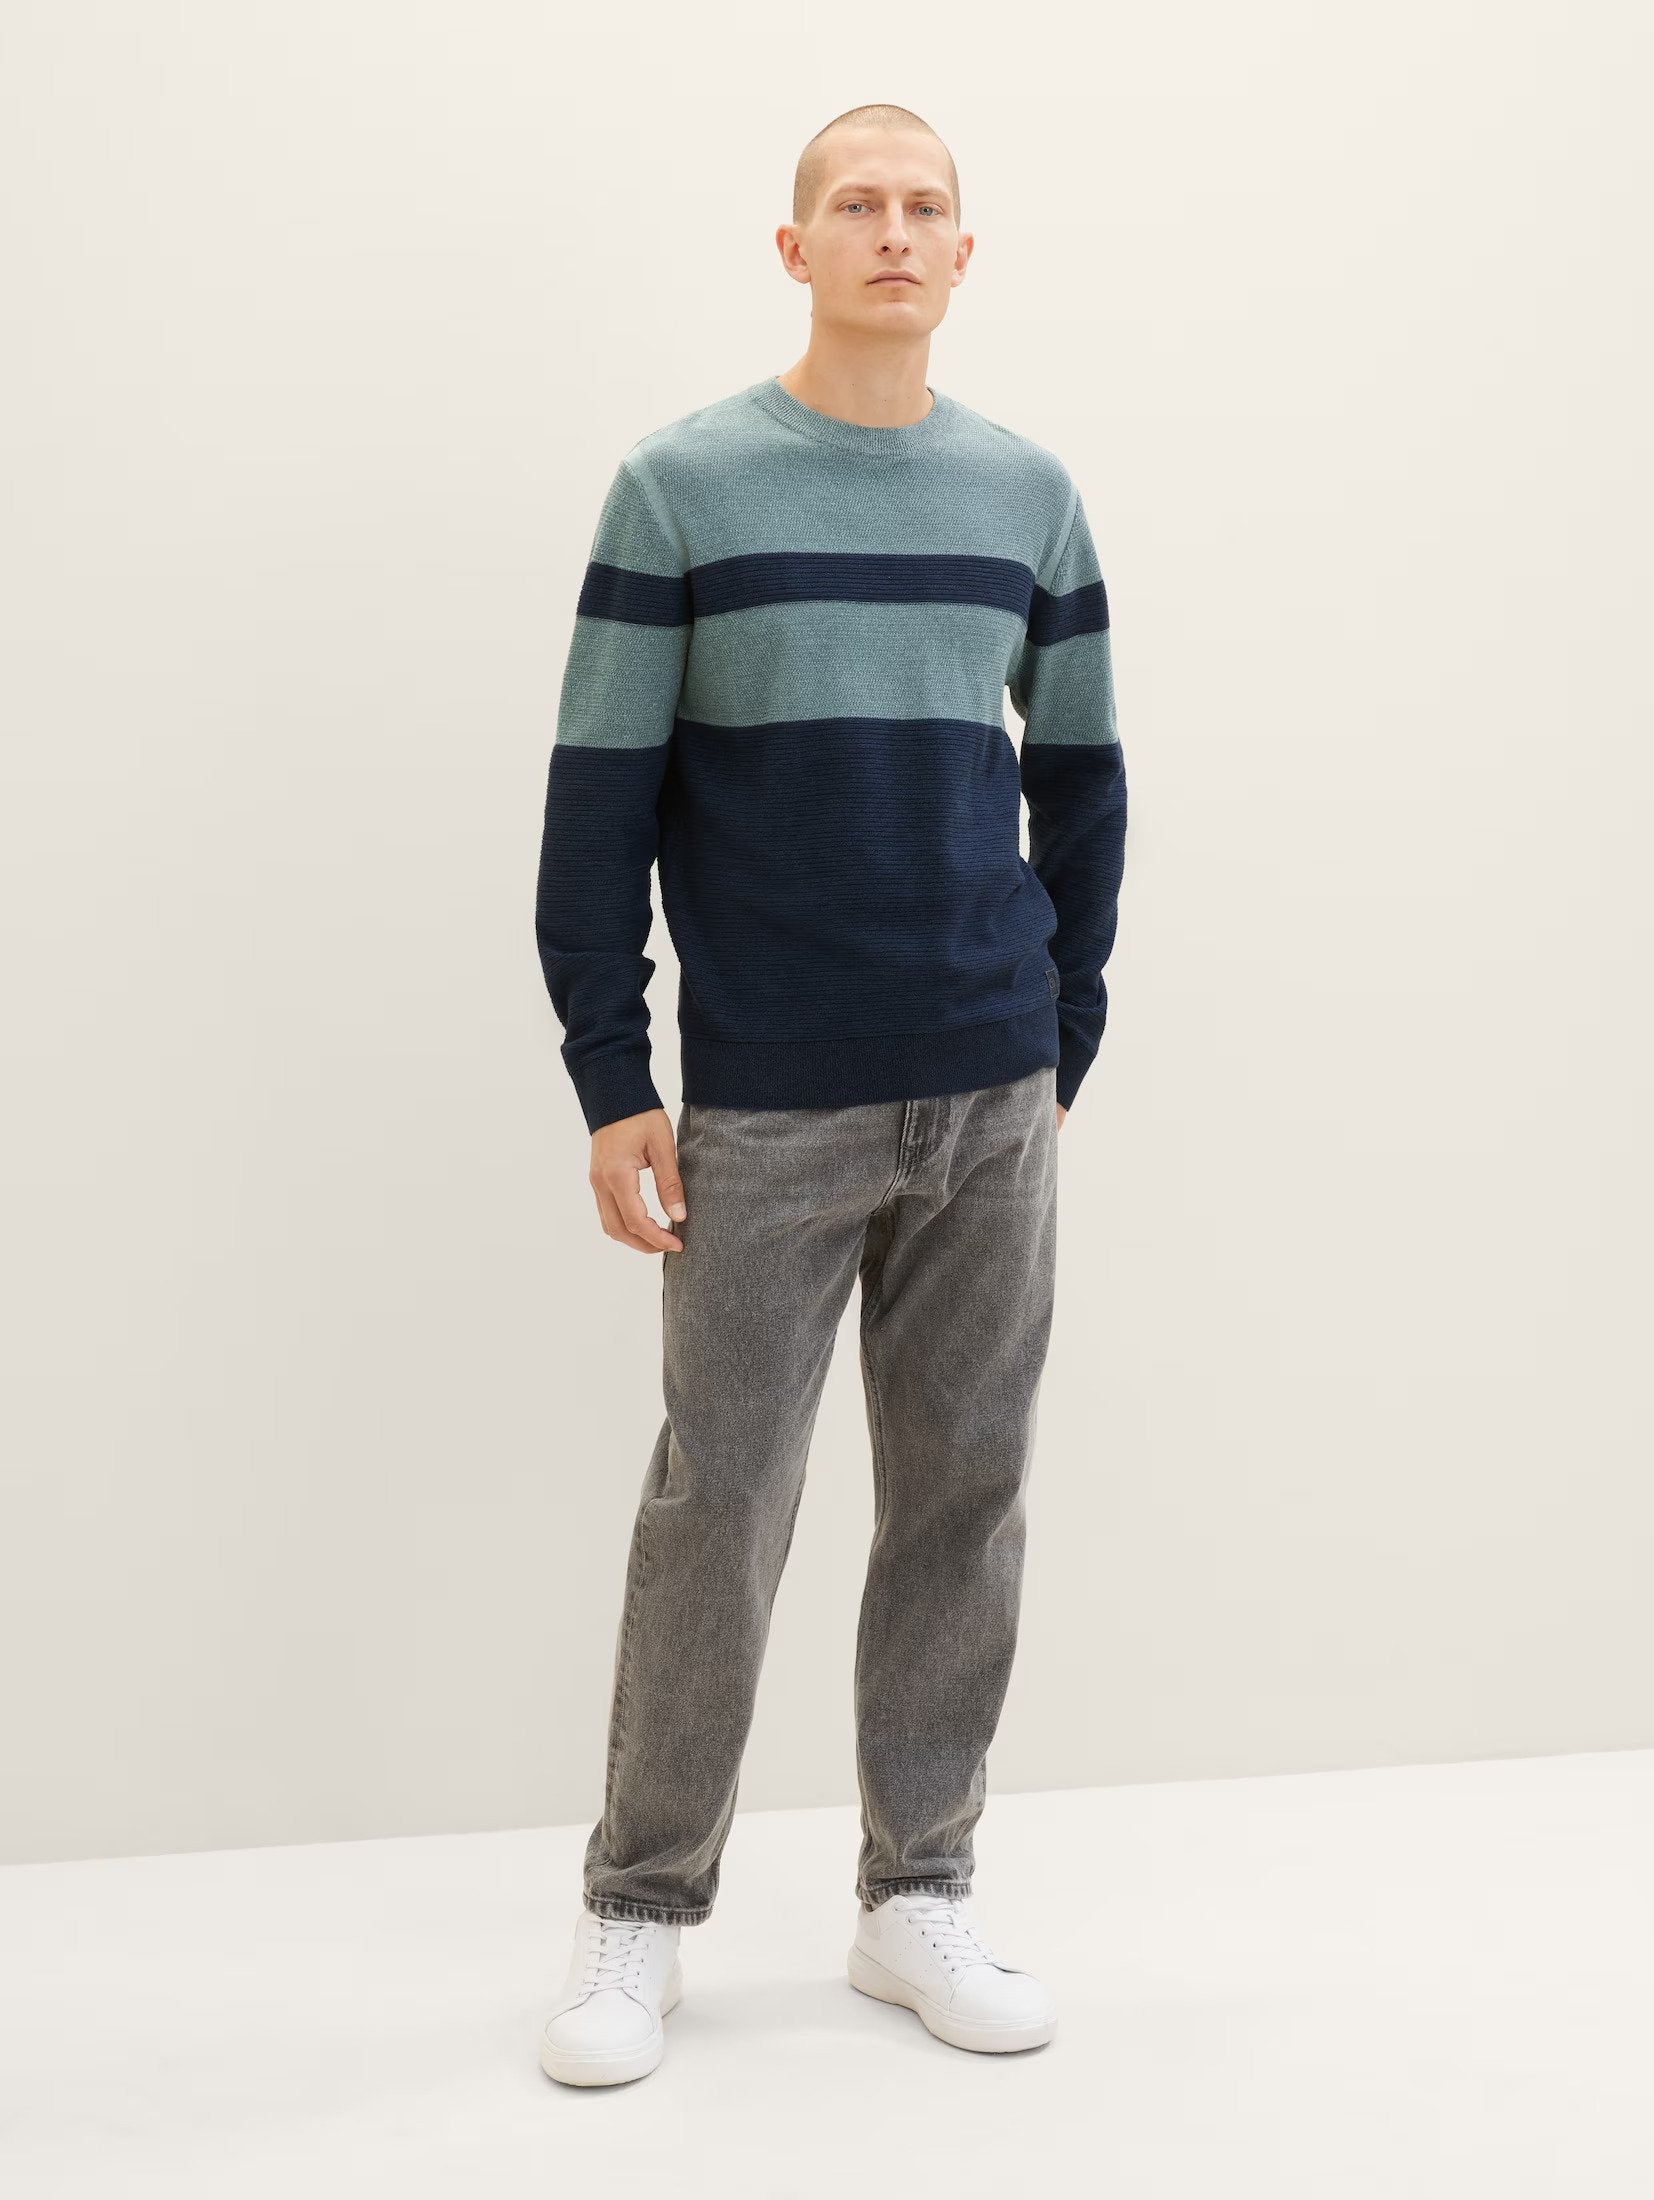 Tom Tailor Knitted Mixed Color Block Sweater